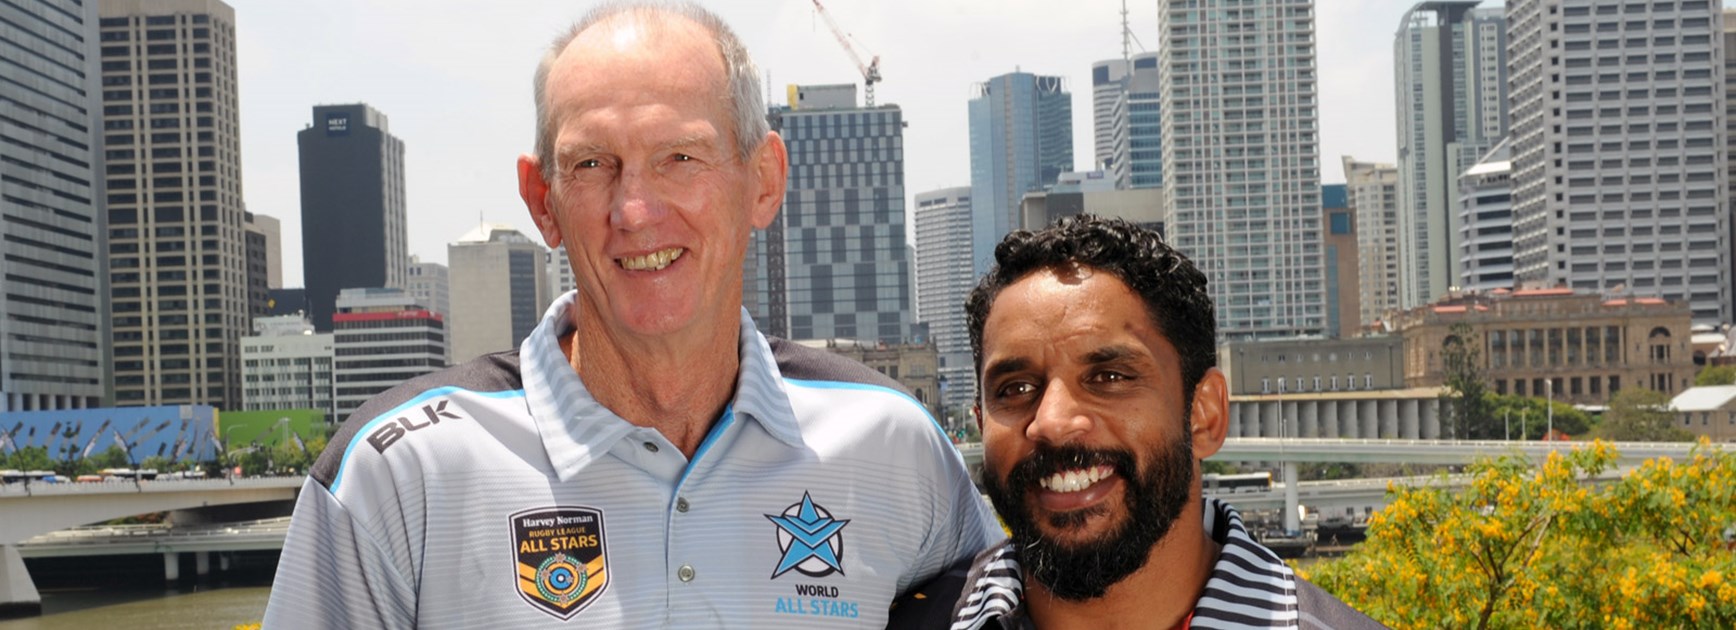 Wayne Bennett and Preston Campbell were on hand to launch the 2016 Rugby League All Stars game.